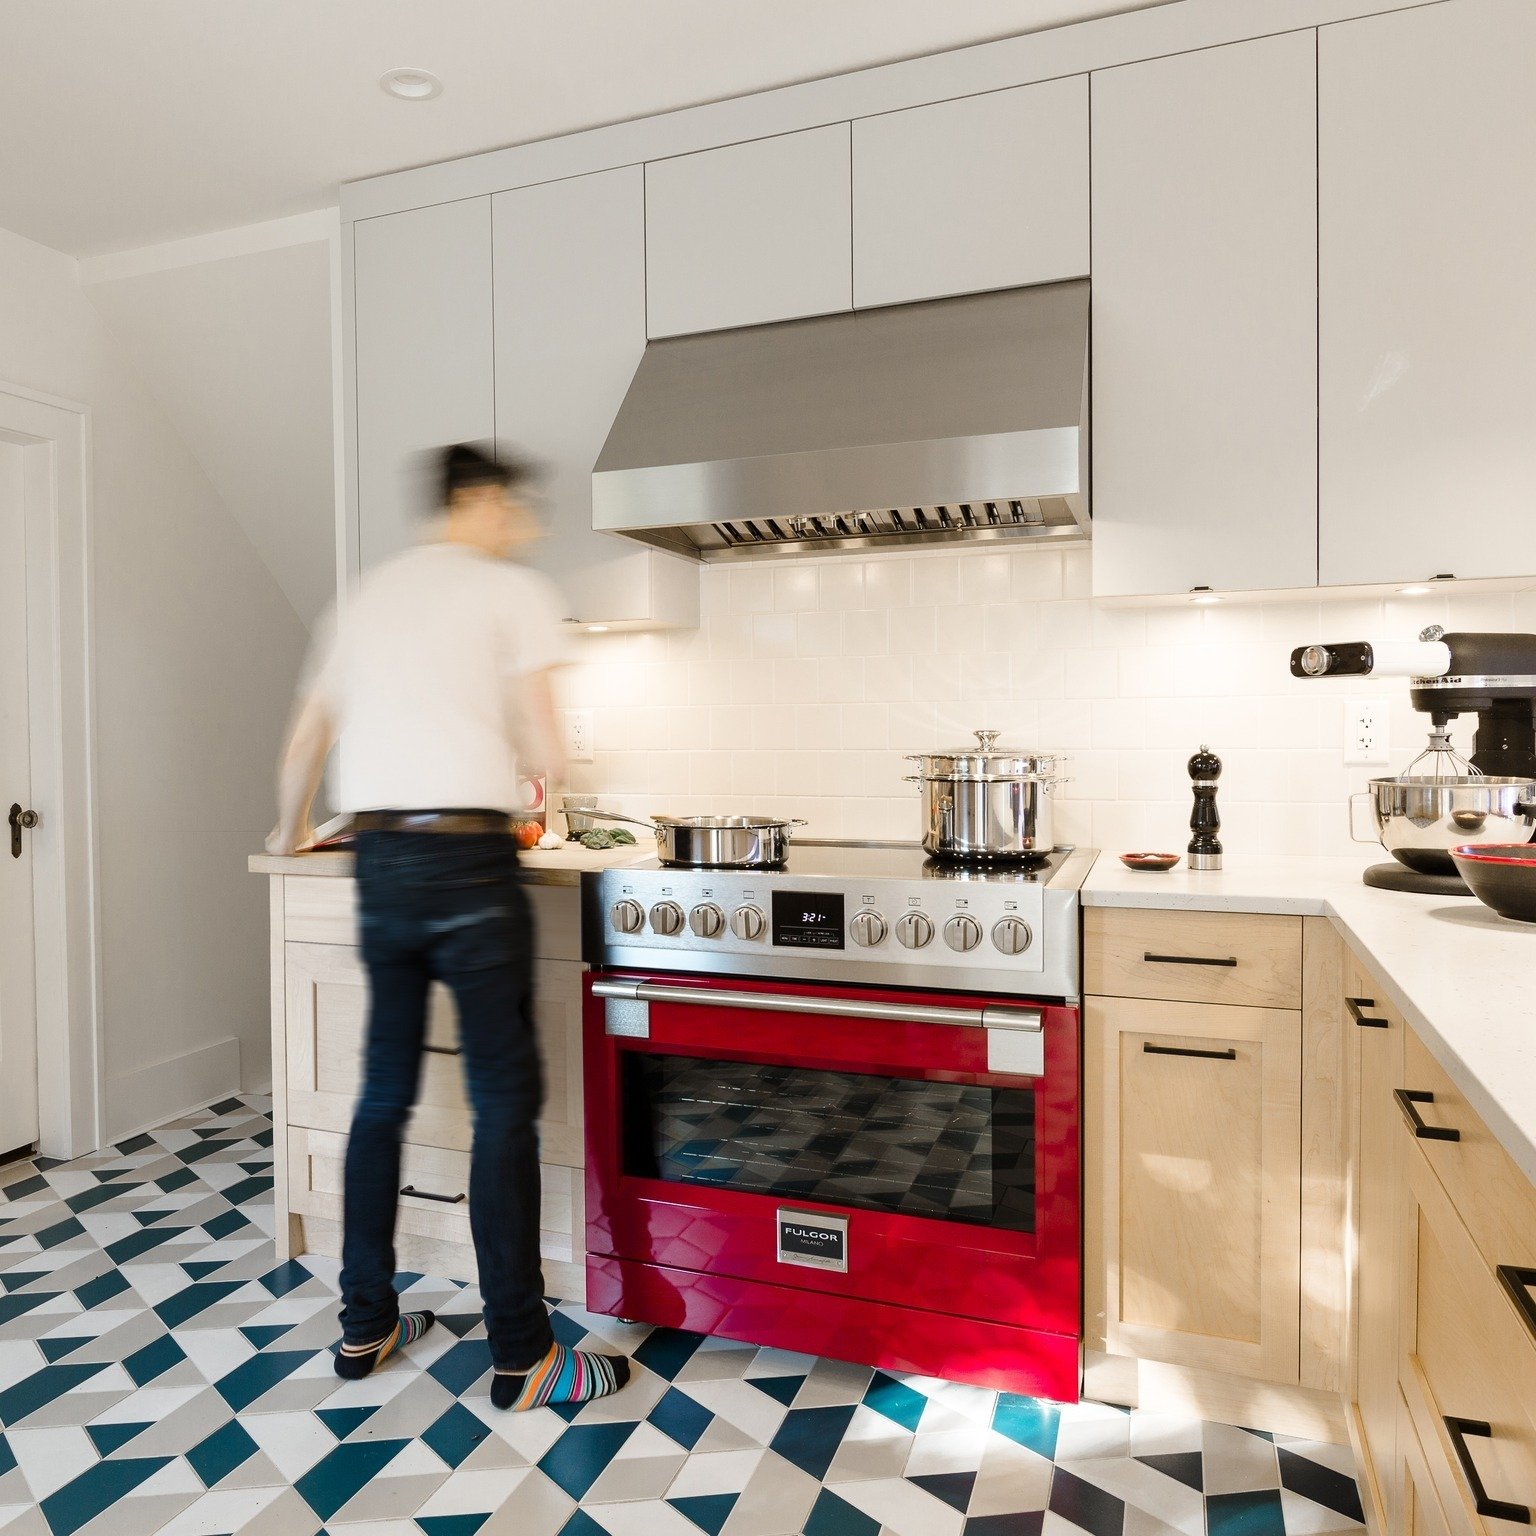 Corey said how about...
Venetian Red?

The word red excites designers like Corey Klassen when they hear it from a client.

With so many hues of red out there to choose from

How do you find THE ONE 
for a dream kitchen?

#2 How do you choose the rest